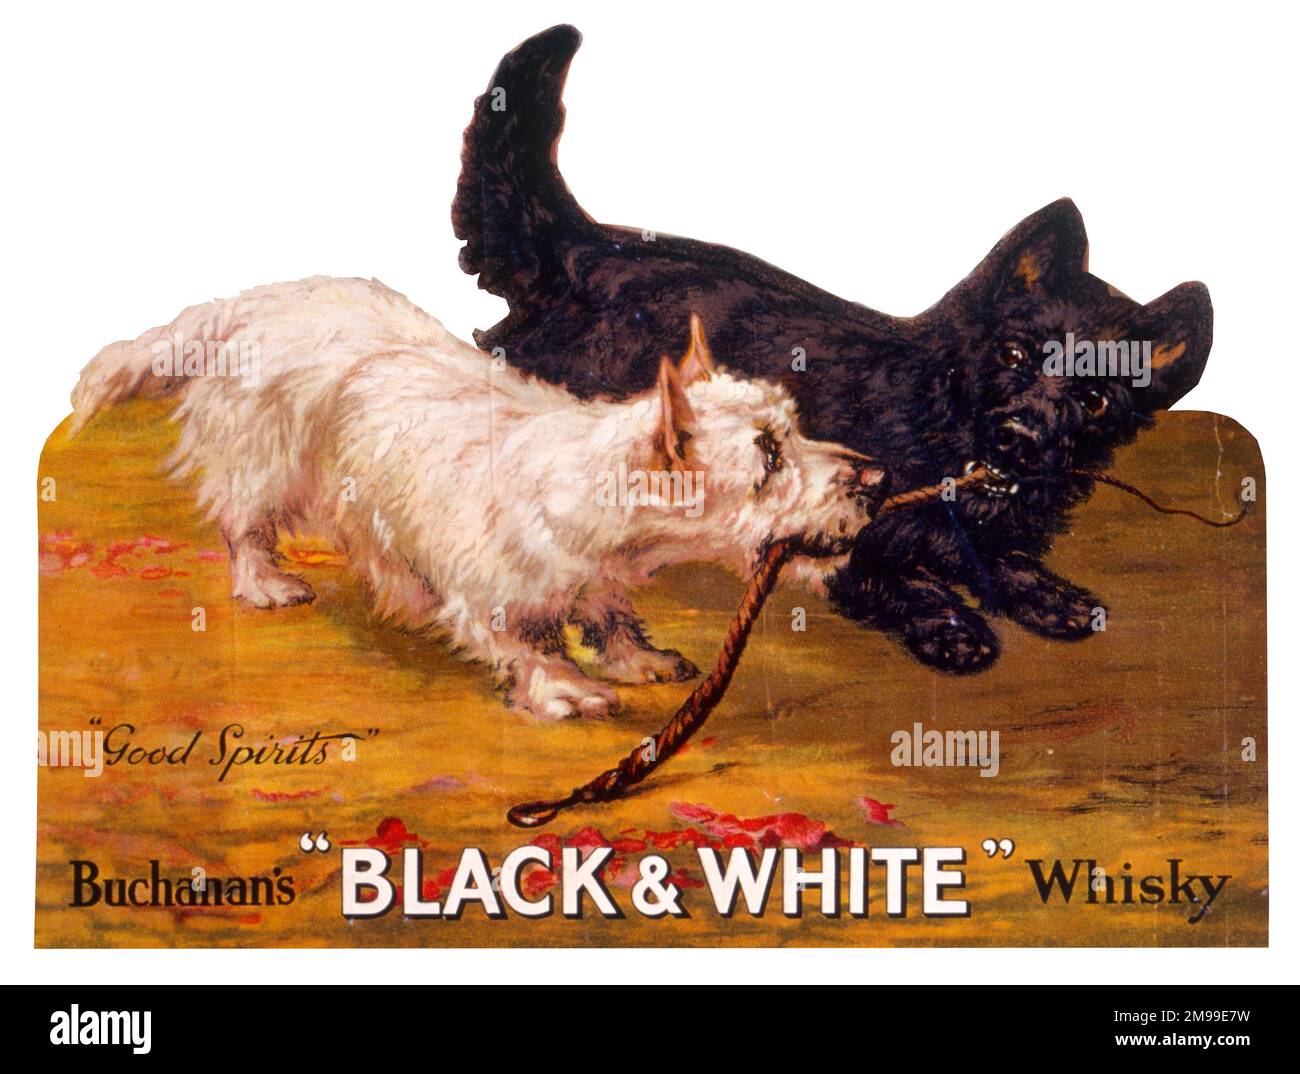 Advertising showcard, Black & White Scots and West Highland terrier dogs, Buchanan's Whisky. Stock Photo